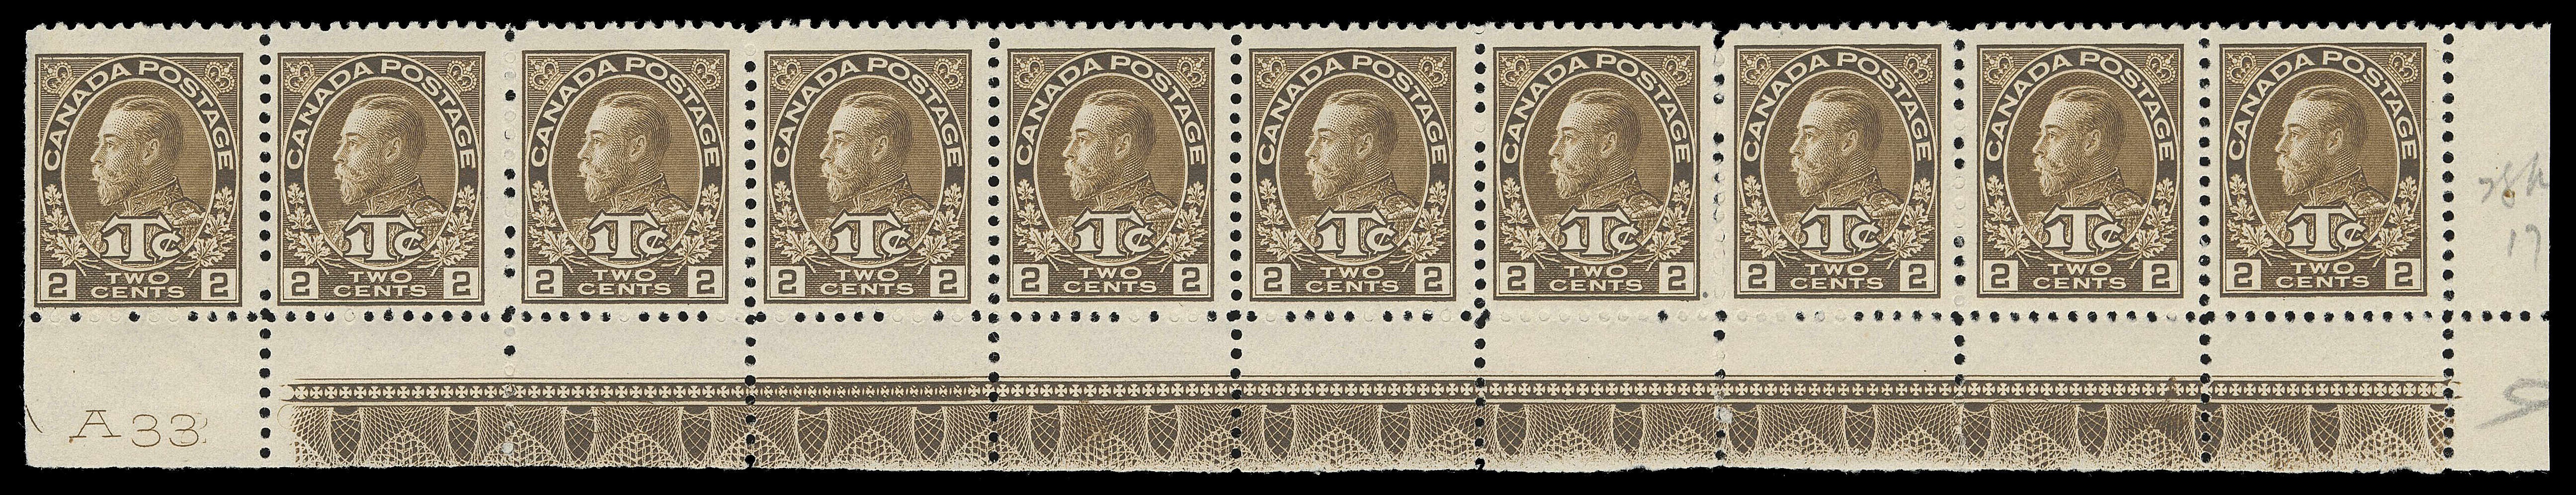 ADMIRAL STAMPS  MR4,A strip of ten from lower right corner of the sheet, natural straight edge, "A33 / 937N" below Position 91 and strong, full Type A lathework on others, the imprint "OTTAWA No A33" and printing order "937M" are visible under the lathework at Positions 92, 93 and 99, also prominent DOUBLE lathework (19mm wide) below Position 94; small hinge thin on straight edged stamp, the nine lathework stamps and varieties are NH, F-VF (Unitrade cat. $3,960)